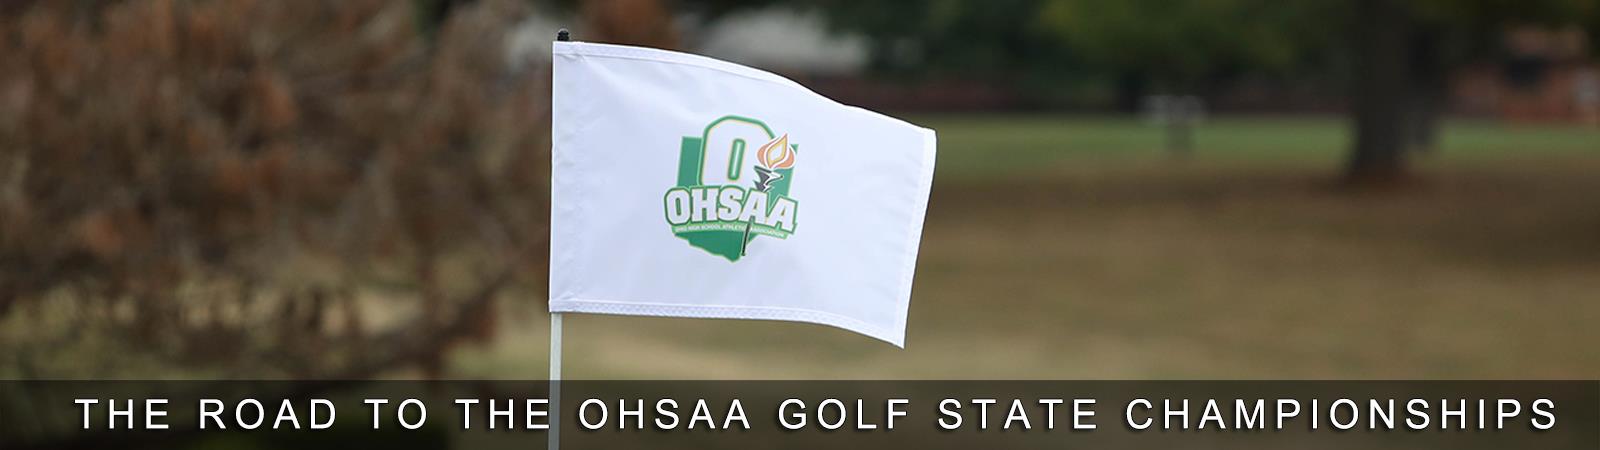 OHSAA_Banner_Large